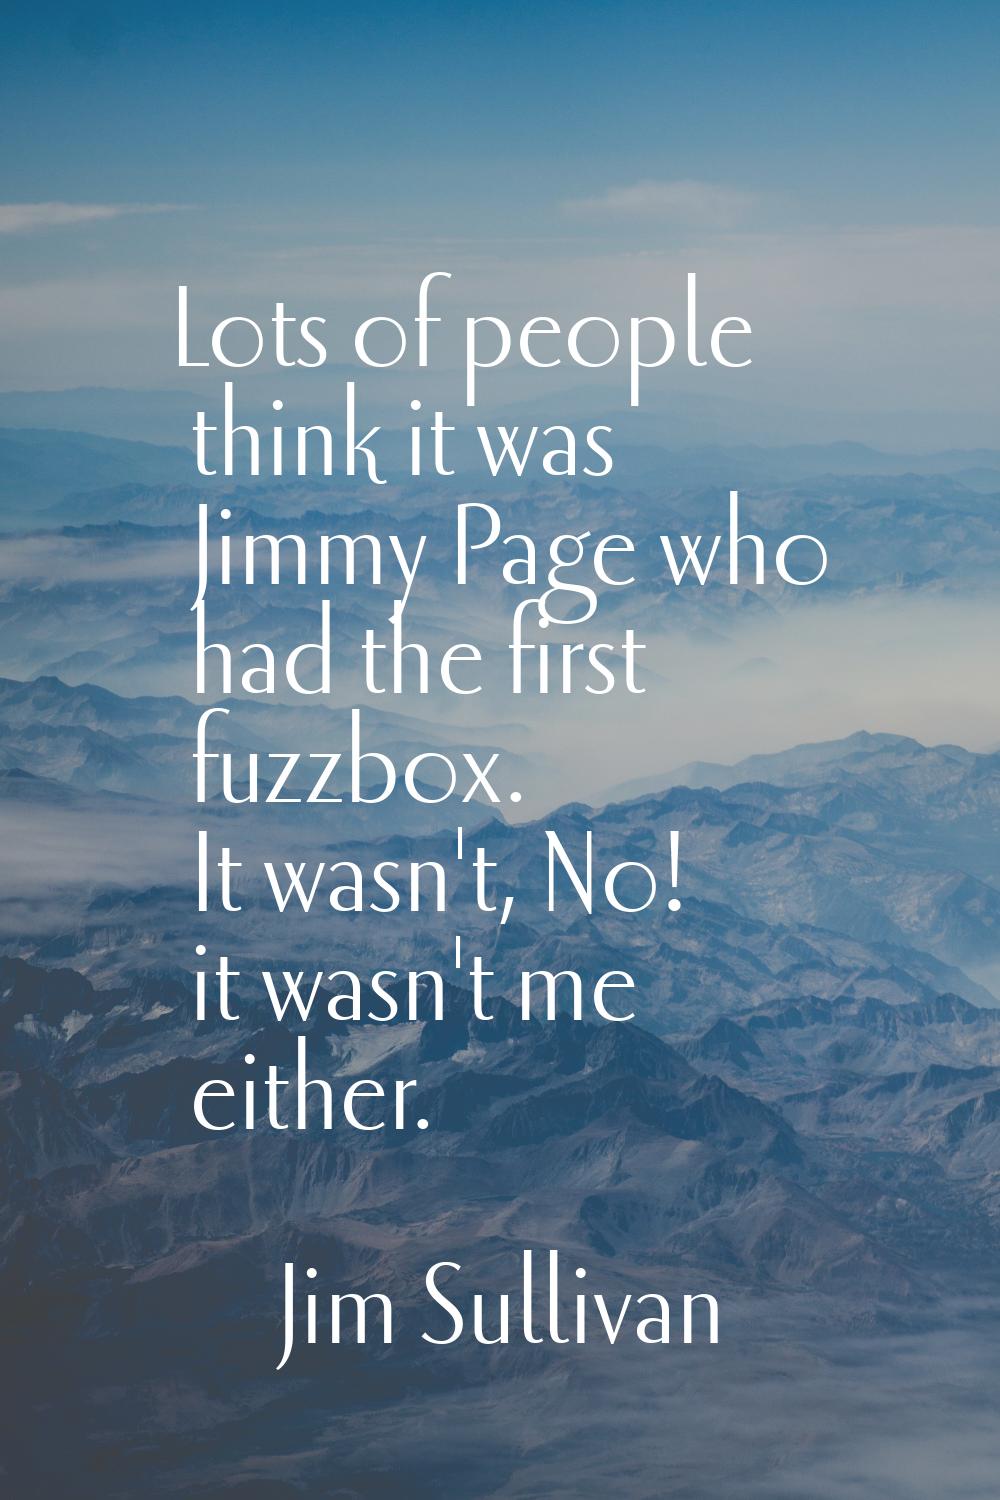 Lots of people think it was Jimmy Page who had the first fuzzbox. It wasn't, No! it wasn't me eithe